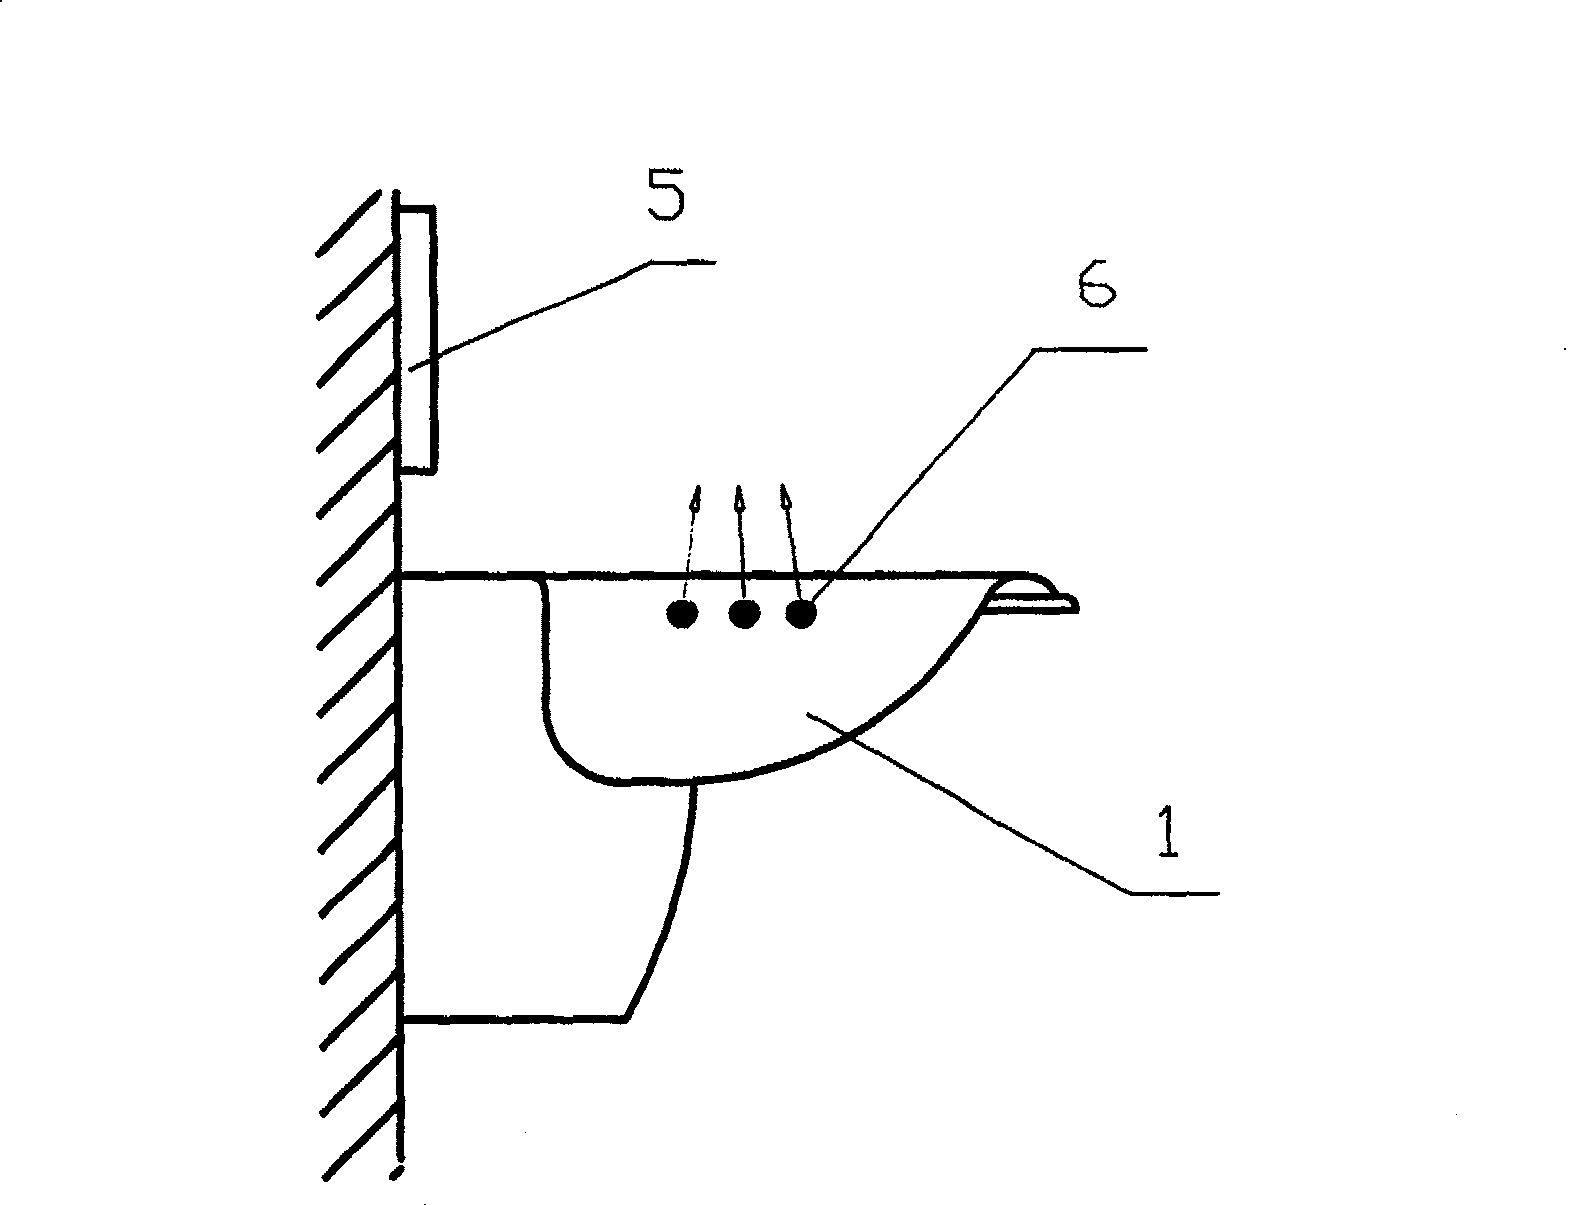 Automatic face and hand washing device